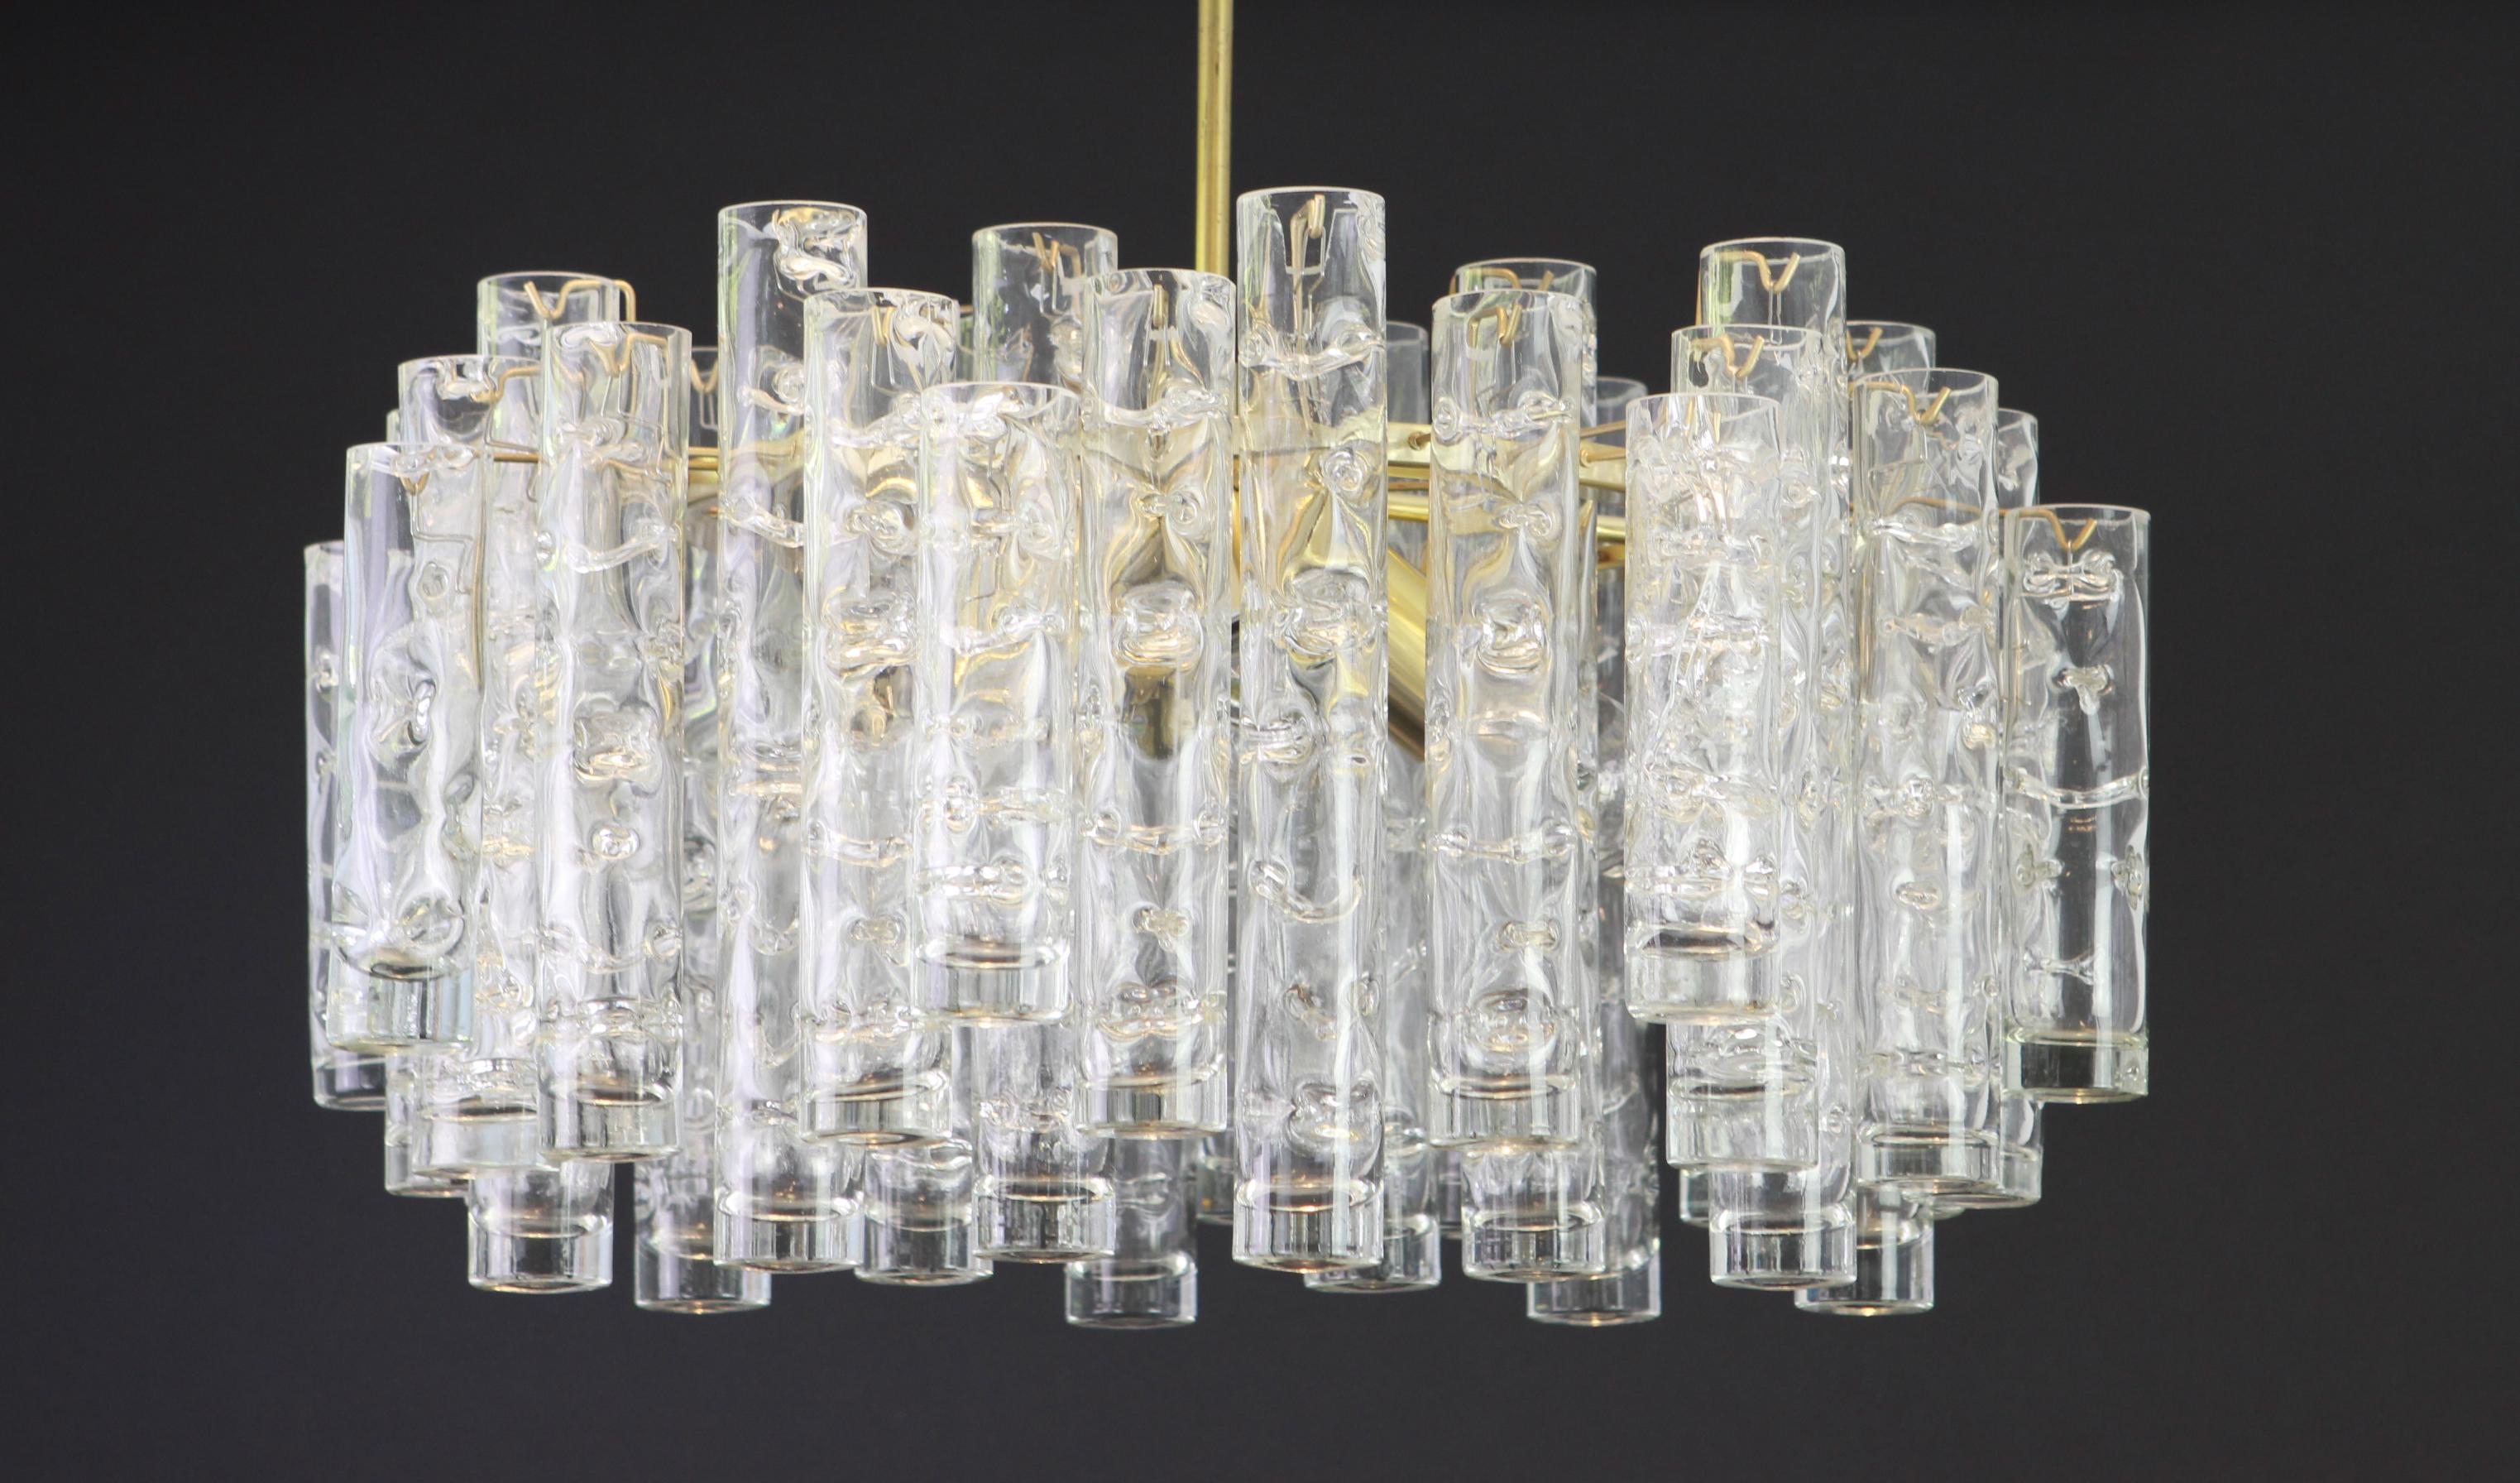 Fantastic midcentury chandelier by Doria, Germany, manufactured circa 1960-1969. A lot Murano glass cylinders suspended from the fixture.

Heavy quality and in very good condition. Cleaned, well-wired and ready to use.

The fixture requires 4 x